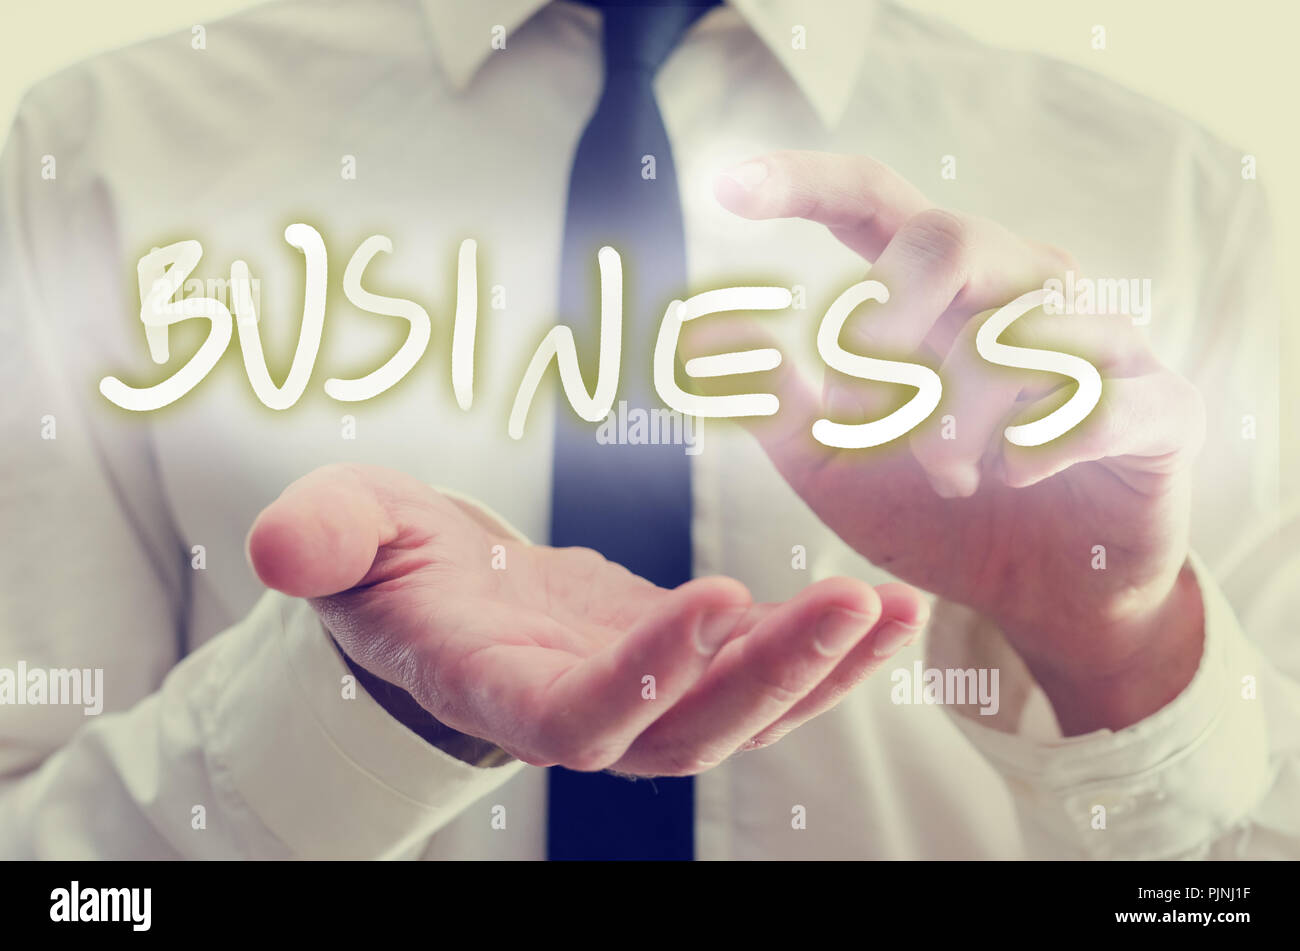 Business startup concept with the hands of a businessman reaching out to protect and activate the glowing word Business on a virtual screen or interfa Stock Photo